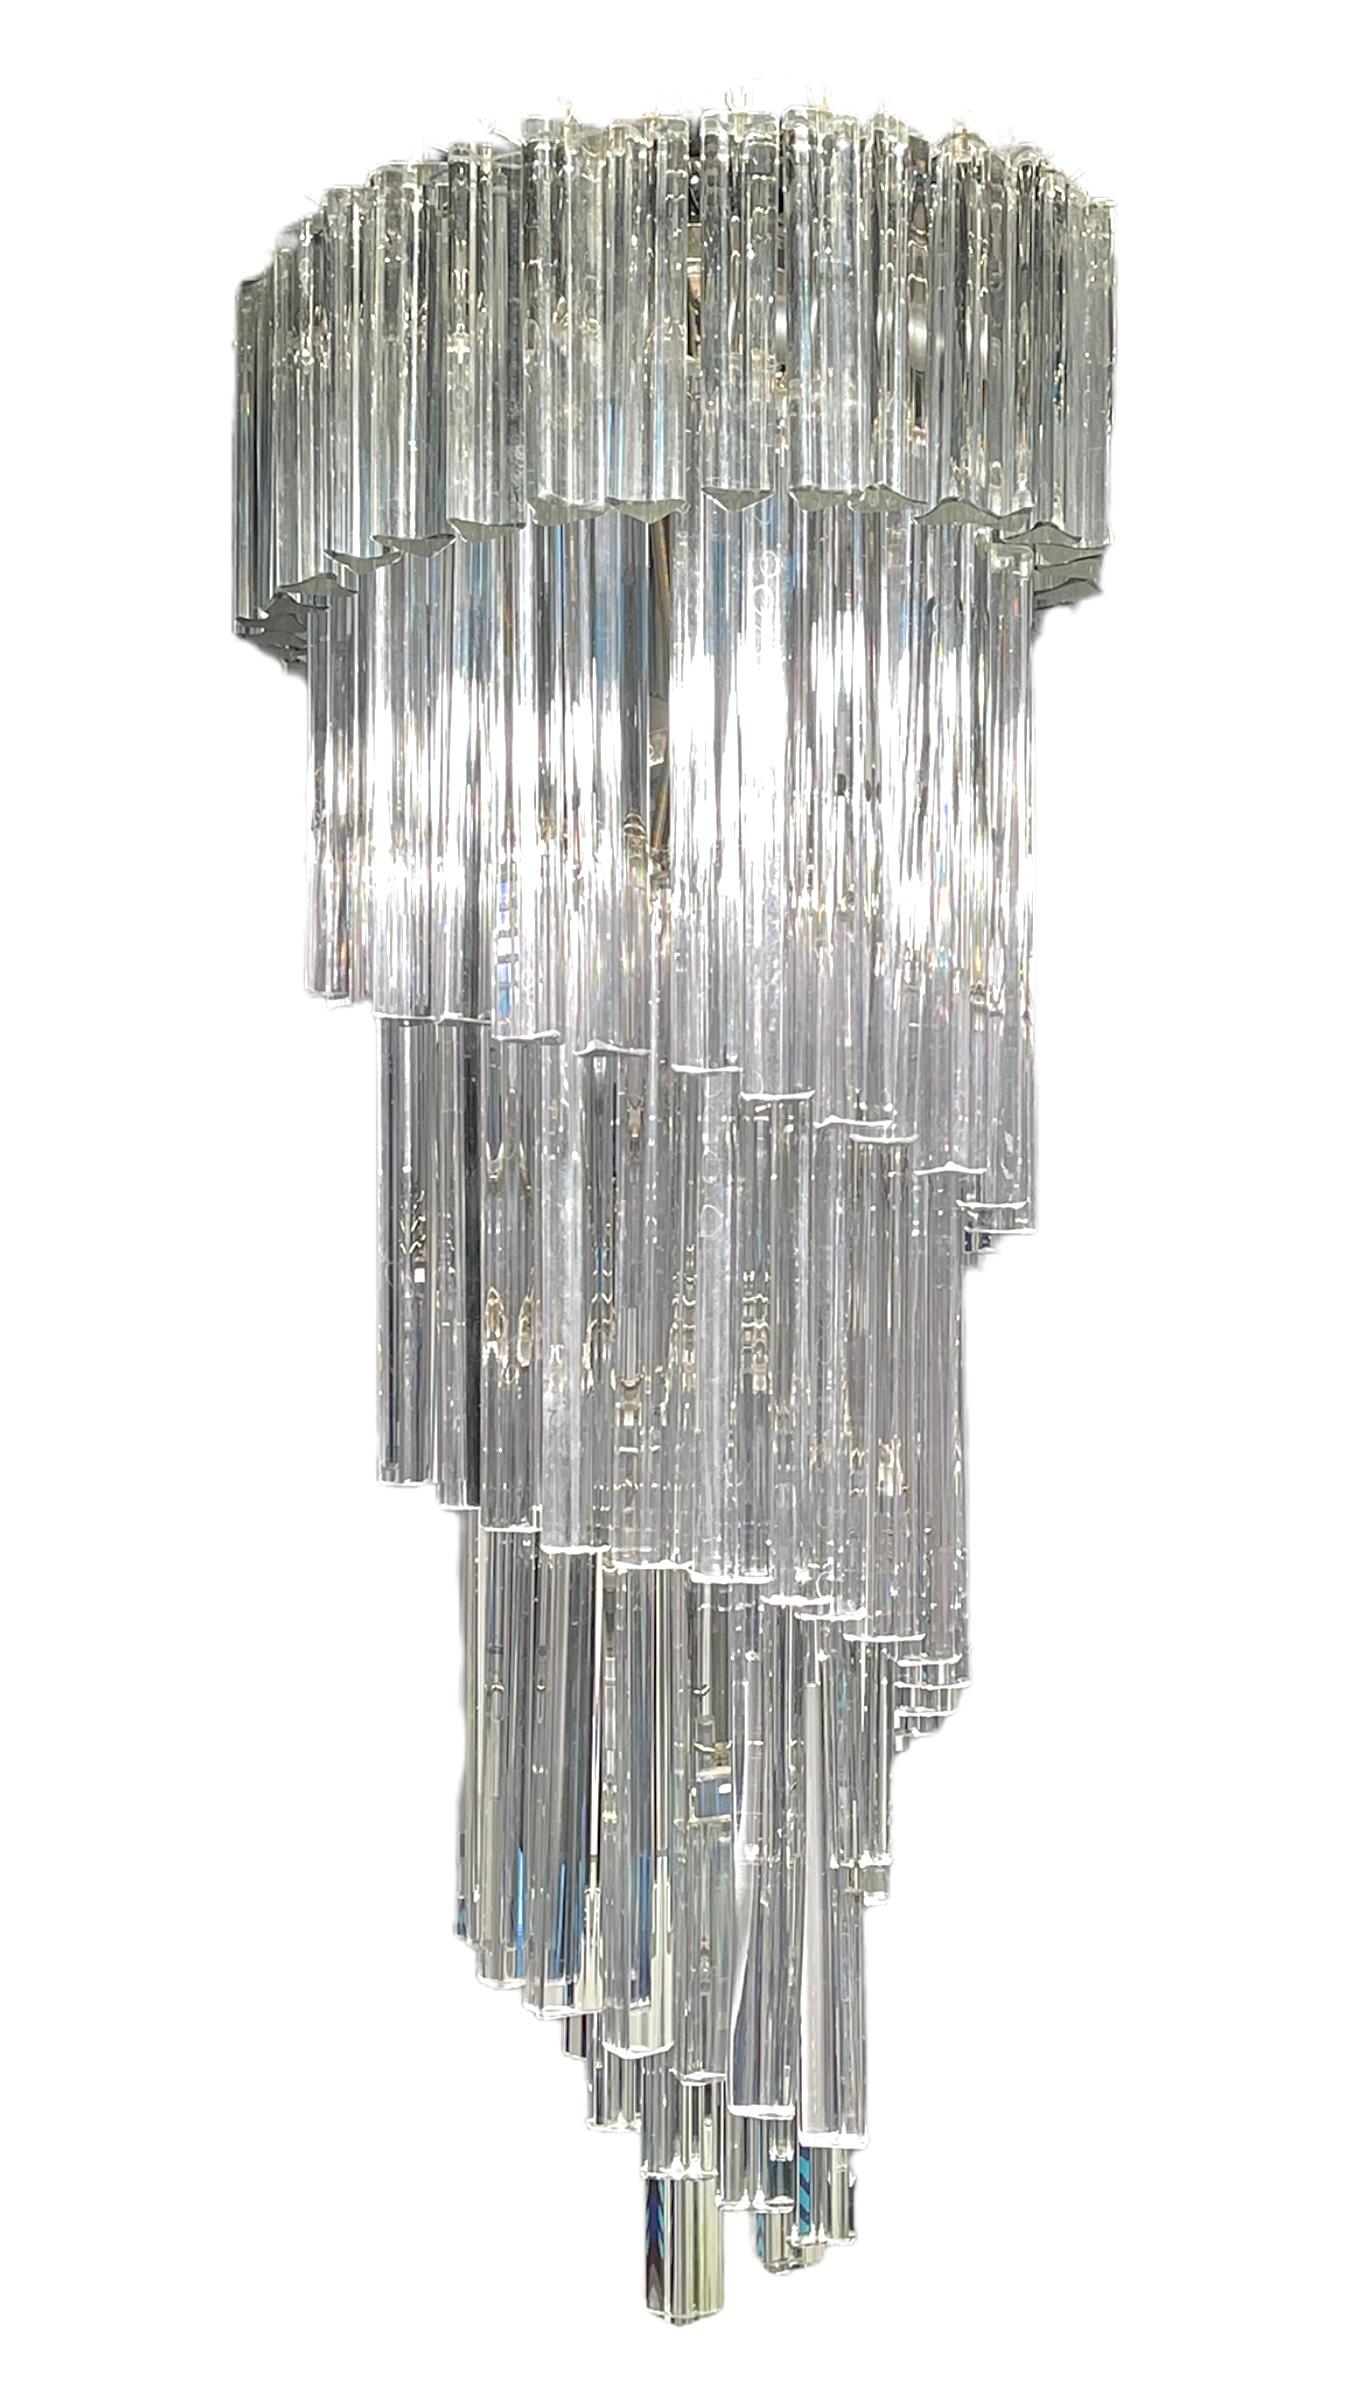 Camer crystal chandelier with chrome hardware. Murano, Italy, circa 1960. A lovely example of the classic spiral form, featuring quadrilobal Murano glass prisms --all in very fine condition. The chandelier is handcrafted, entirely manufactured in